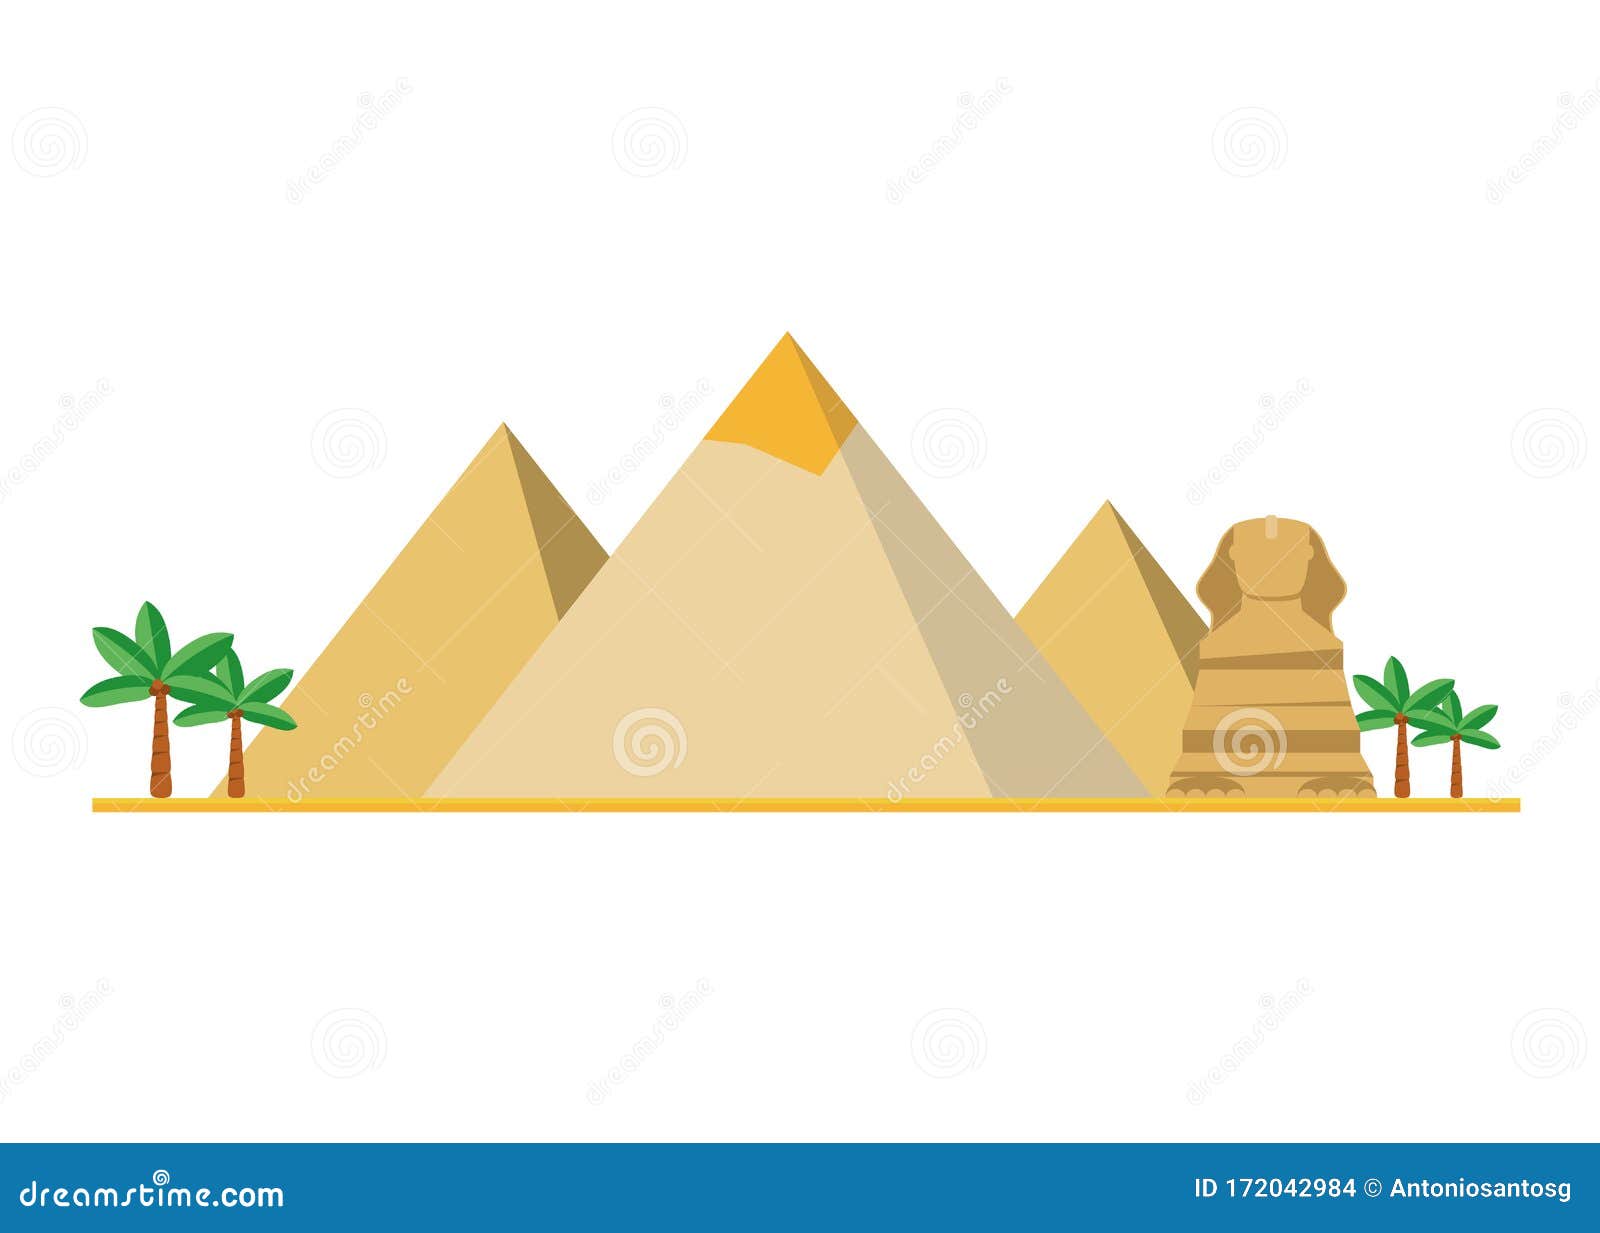 pyramids-of-giza-egypt-continuous-line-drawing-one-line-sketch-of